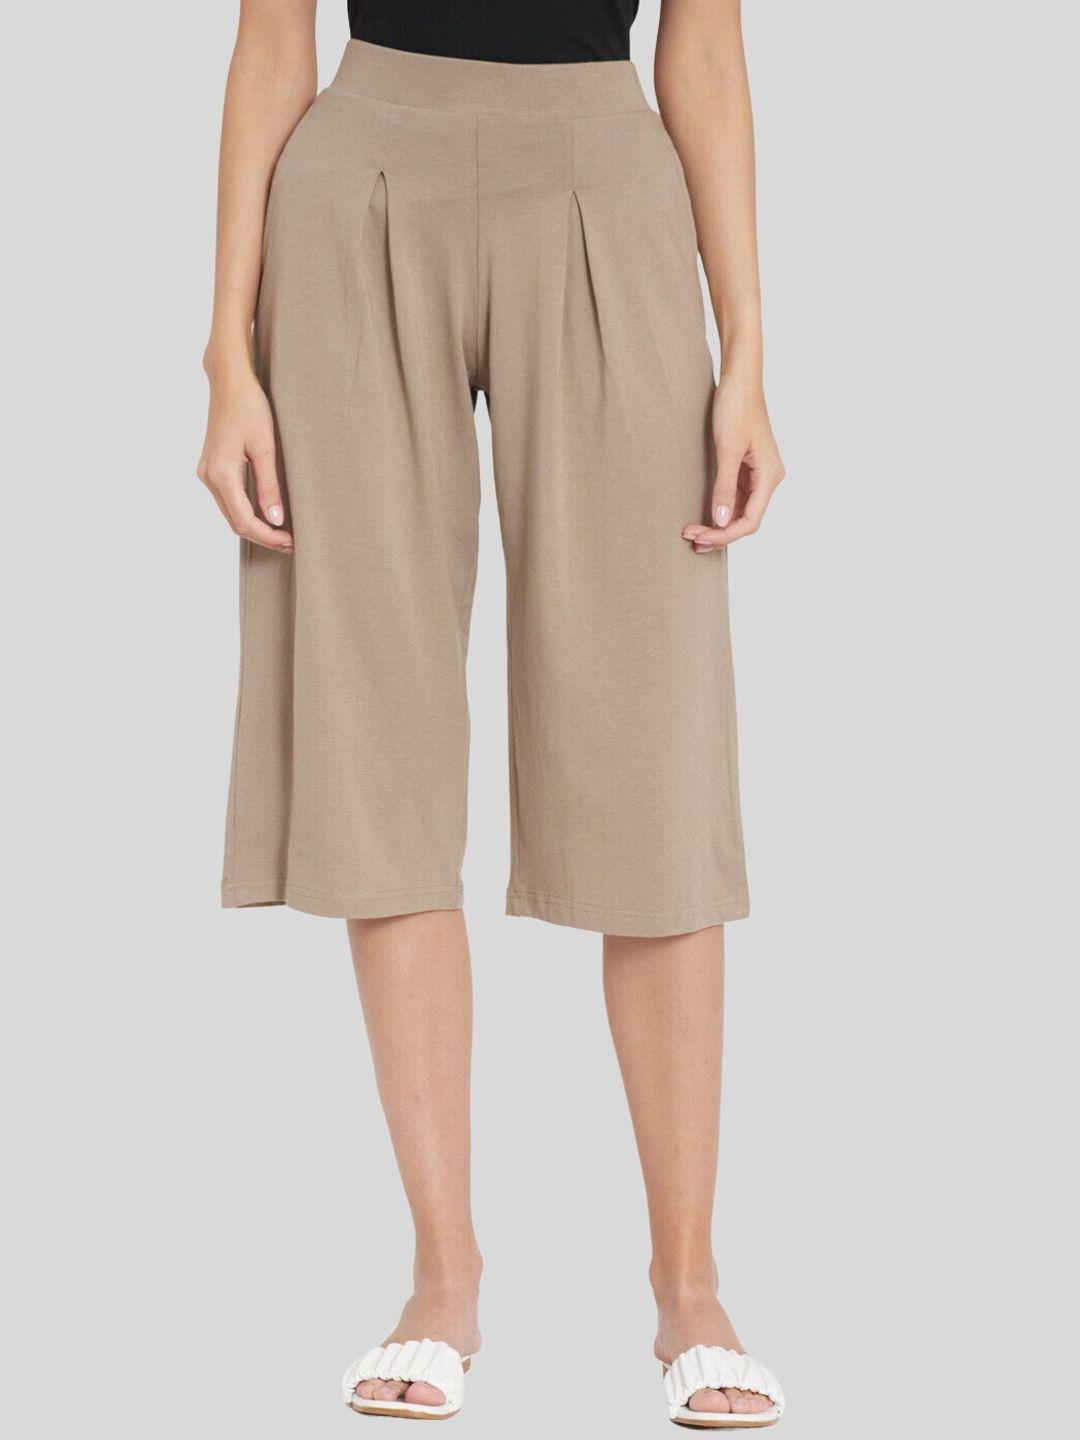 unmade women mid-rise pleated three-fourth length culottes